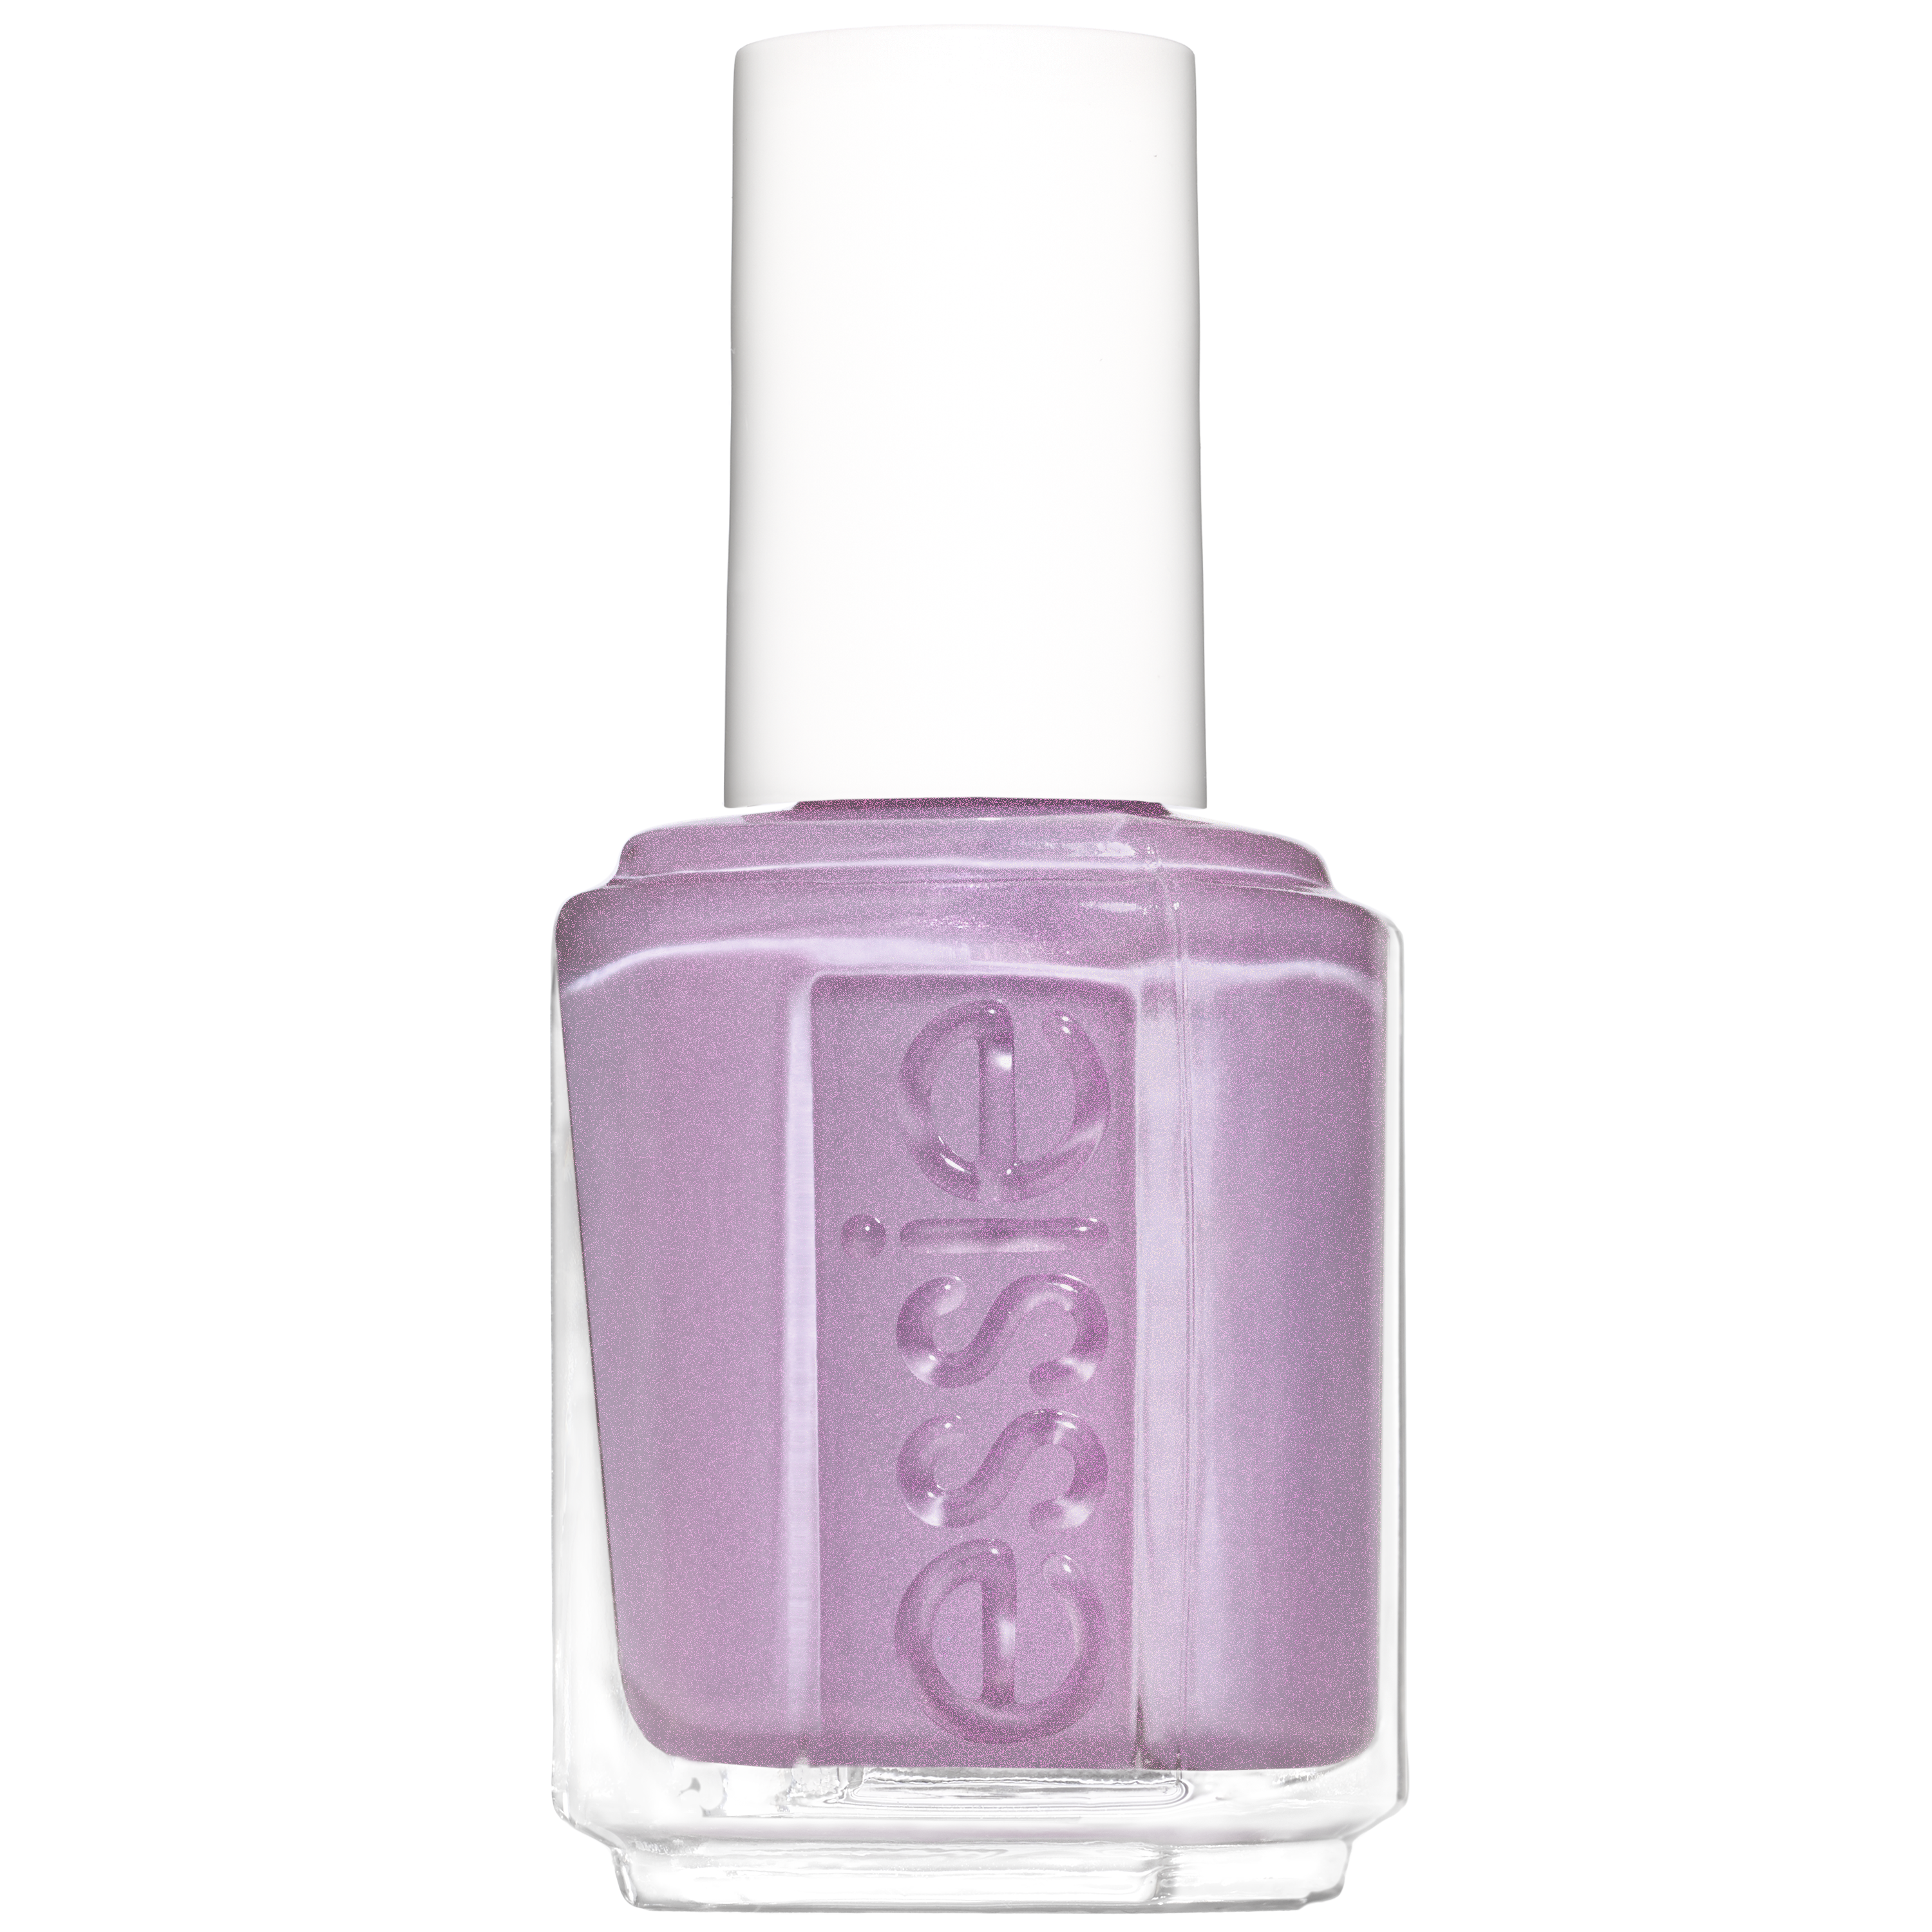 Review, Photos, Swatches, Best Nail Polish, Looks, Trends 2020, 2021: Essie, Spring 2020 Nail Polish Collection, Best Pastel Nail Polish Shades